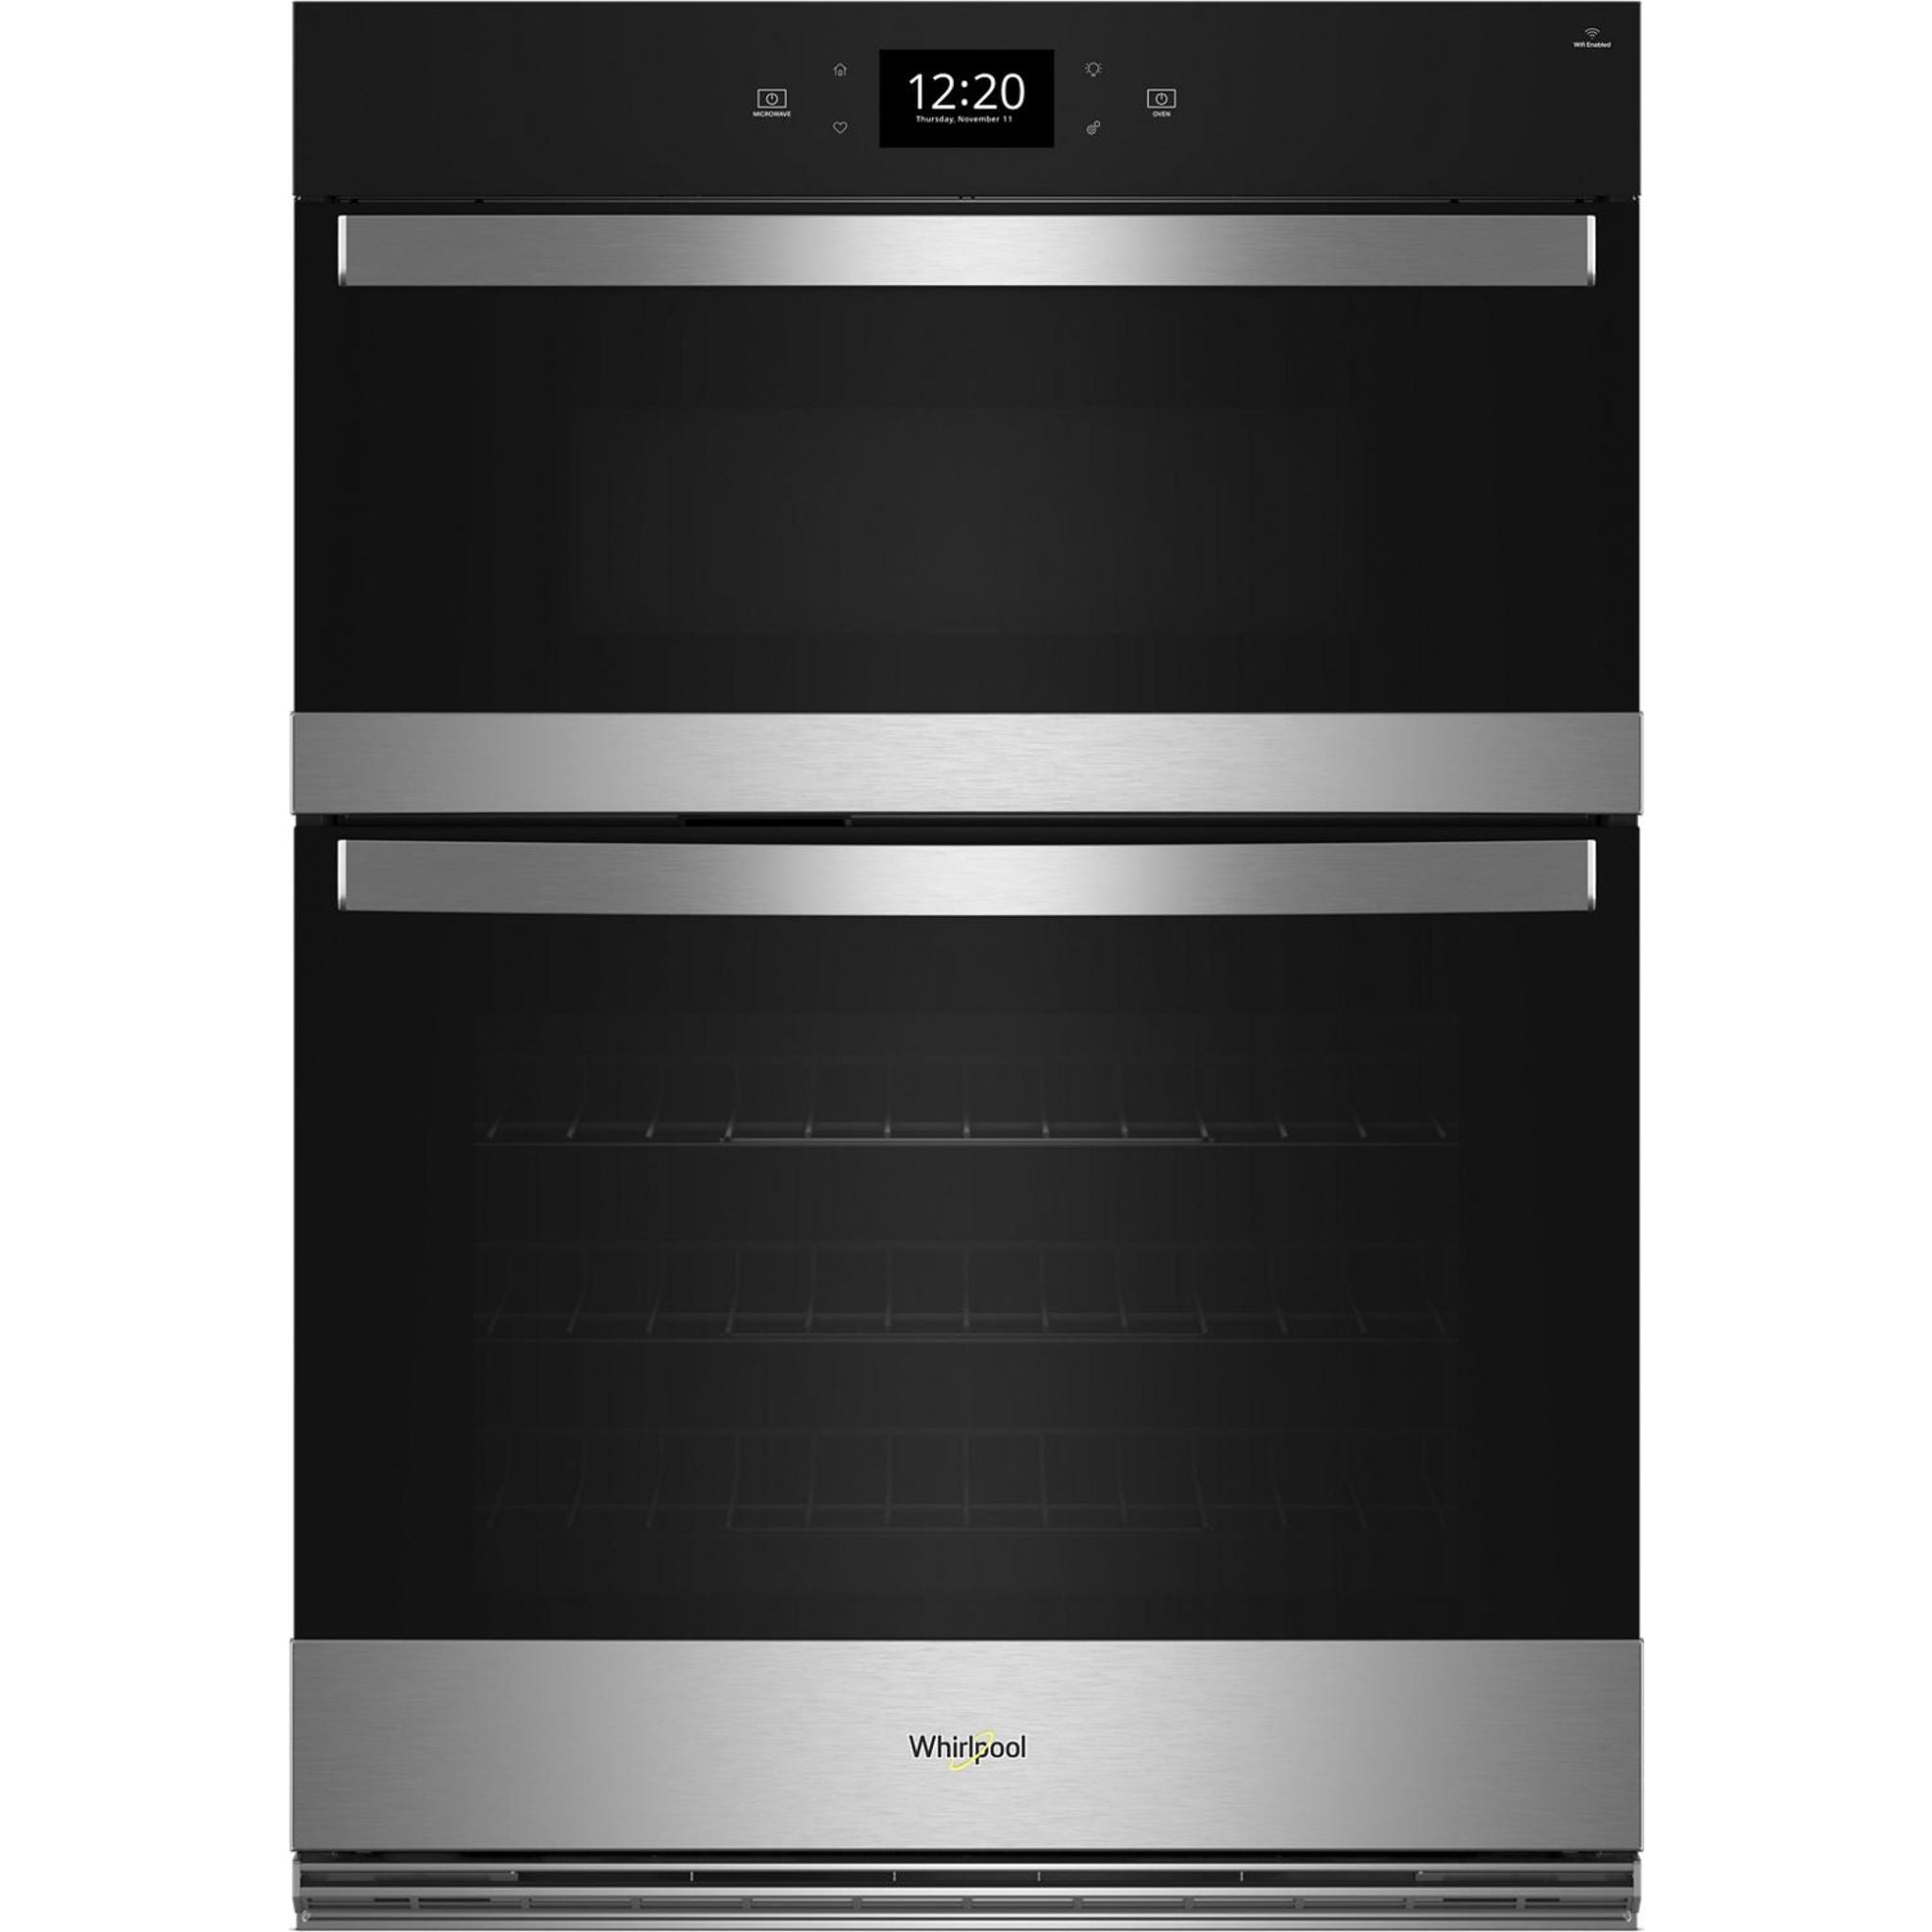 Whirlpool, 30" True Convection Wall Oven (WOEC7030PZ) - Fingerprint Resistant Stainless Steel